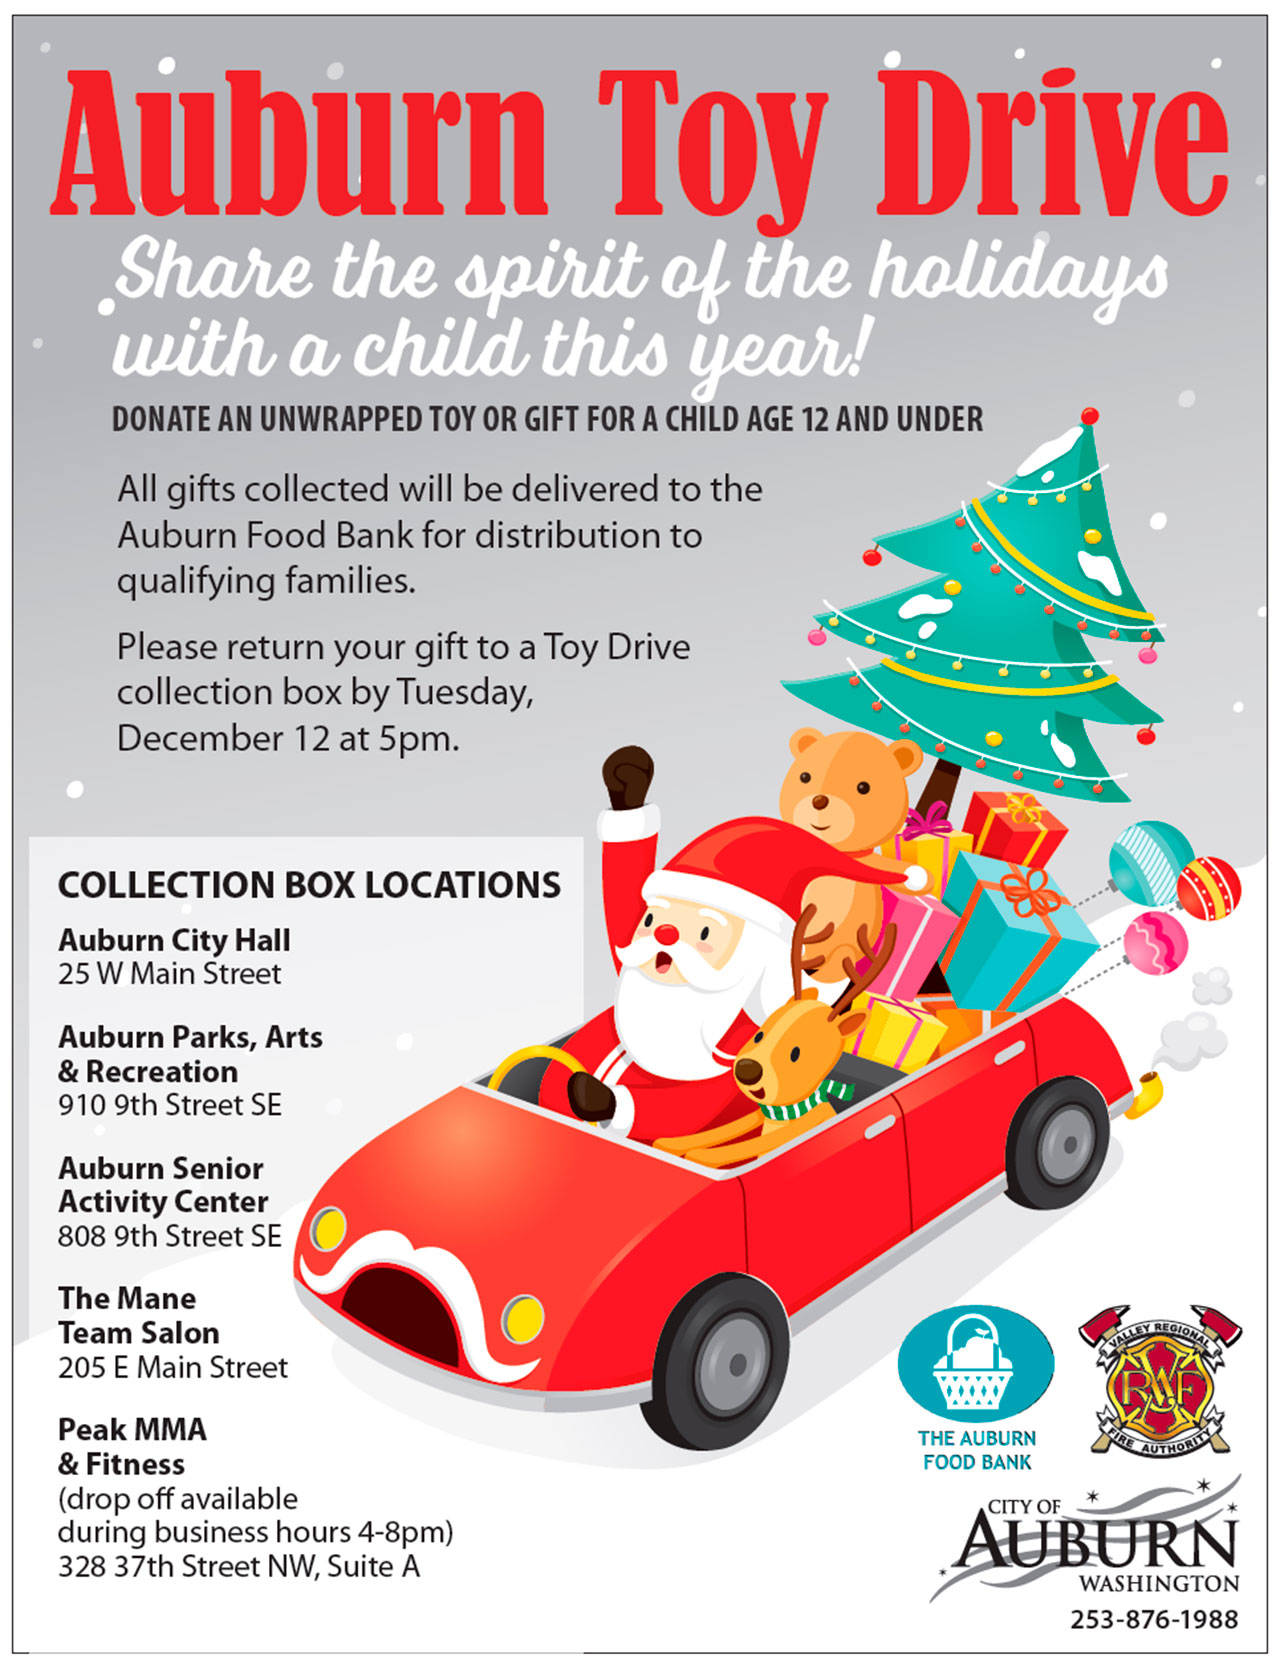 Tree of Giving Toy Drive begins for the holidays